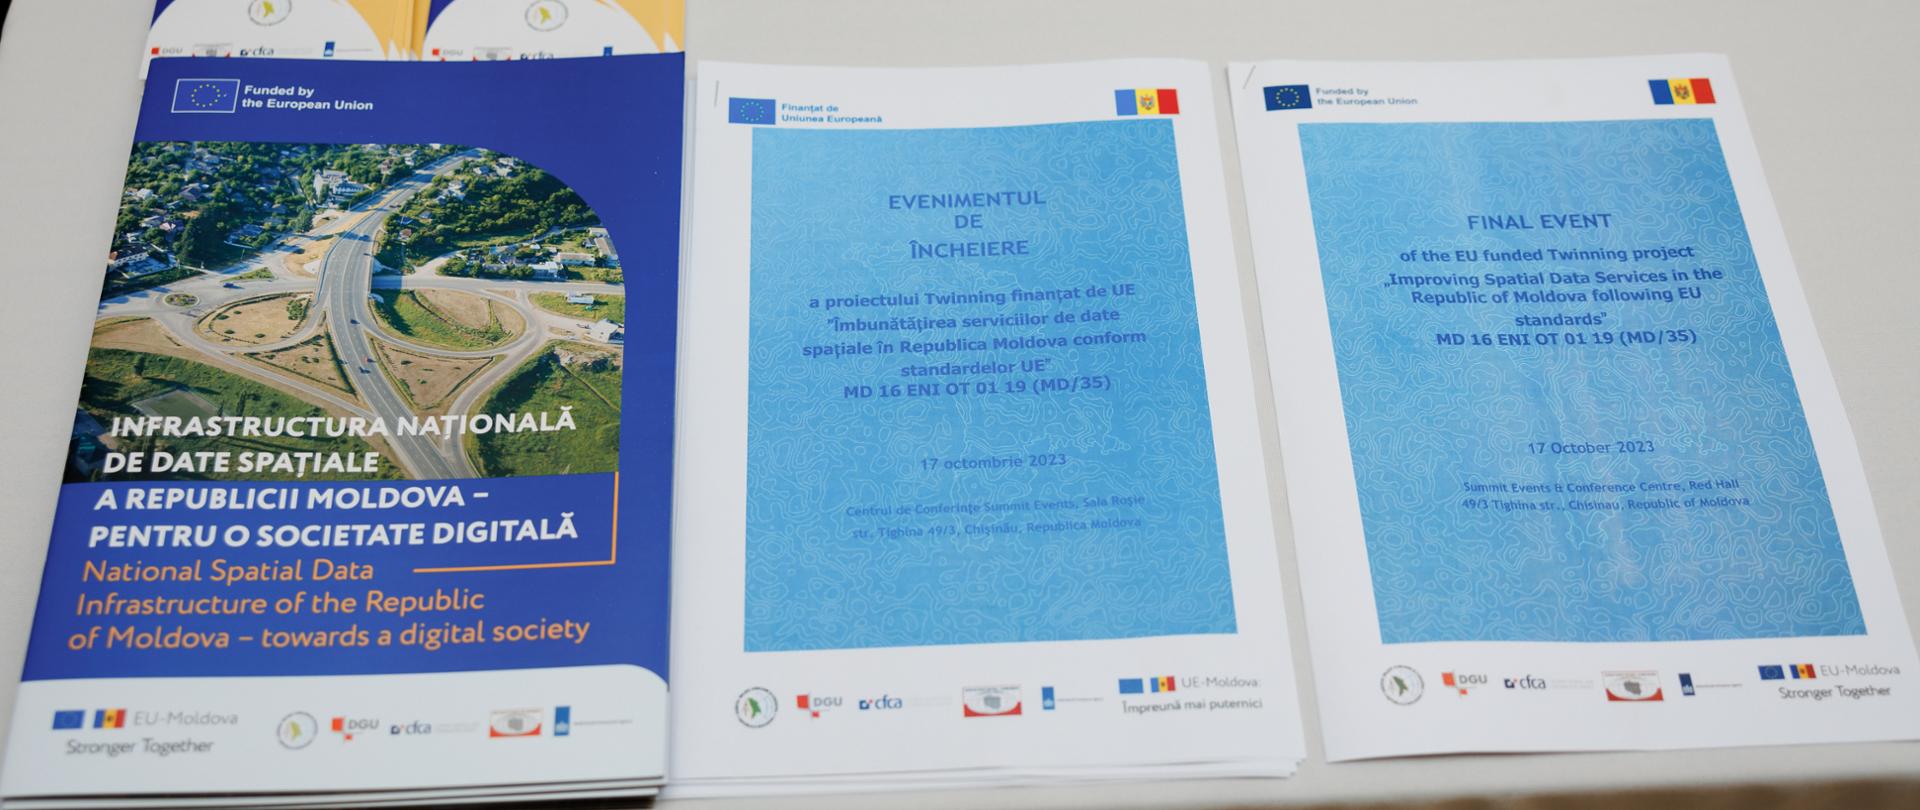 Folders regarding the conference ending the twinning project „Improving Spatial Data Services in the Republic of Moldova following EU standards"